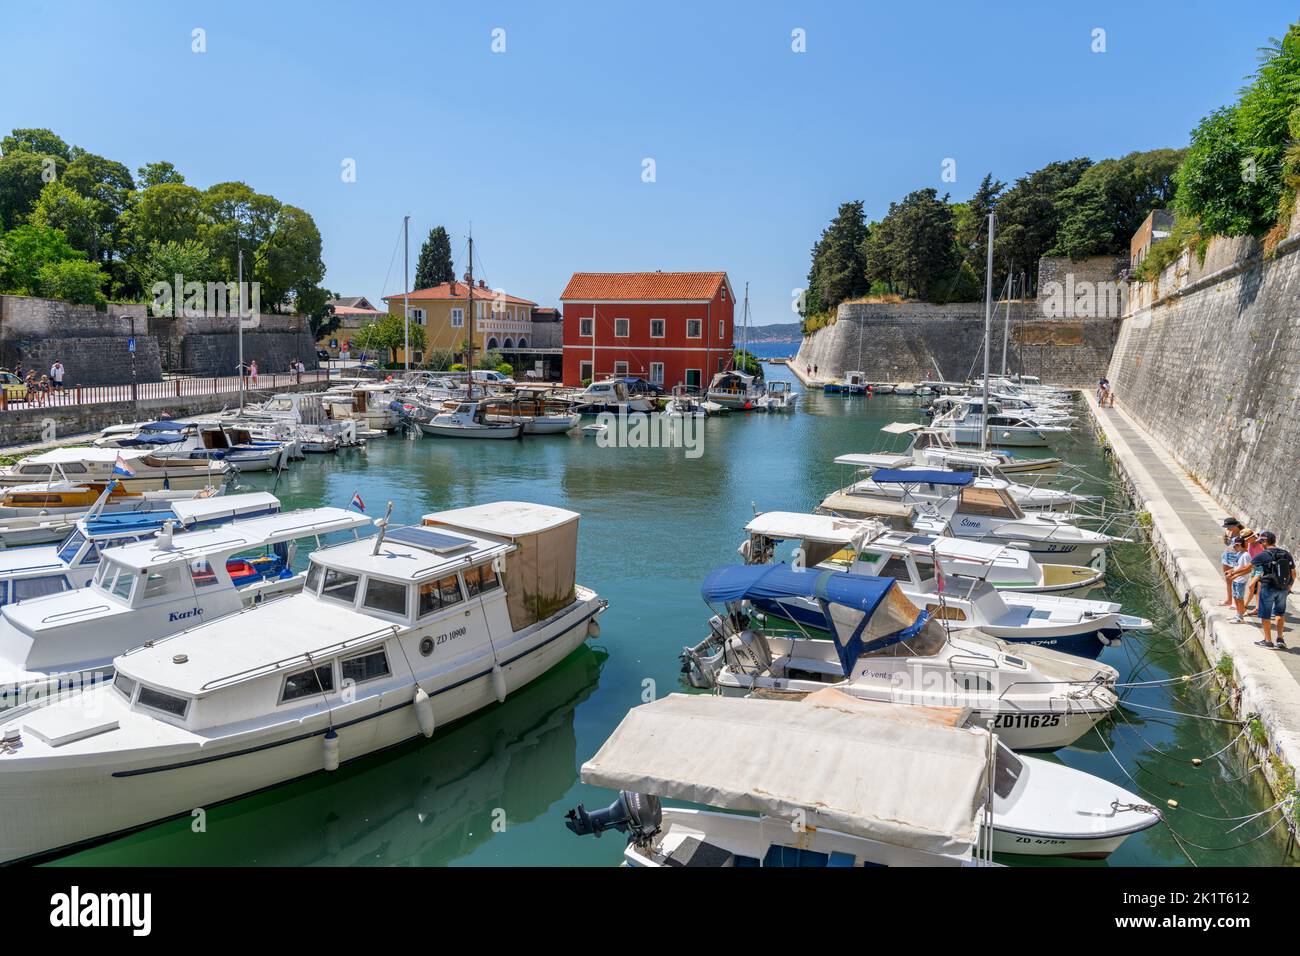 Boats moored outside the Land Gate, the historic entrance to the city of Zadar, Croatia Stock Photo